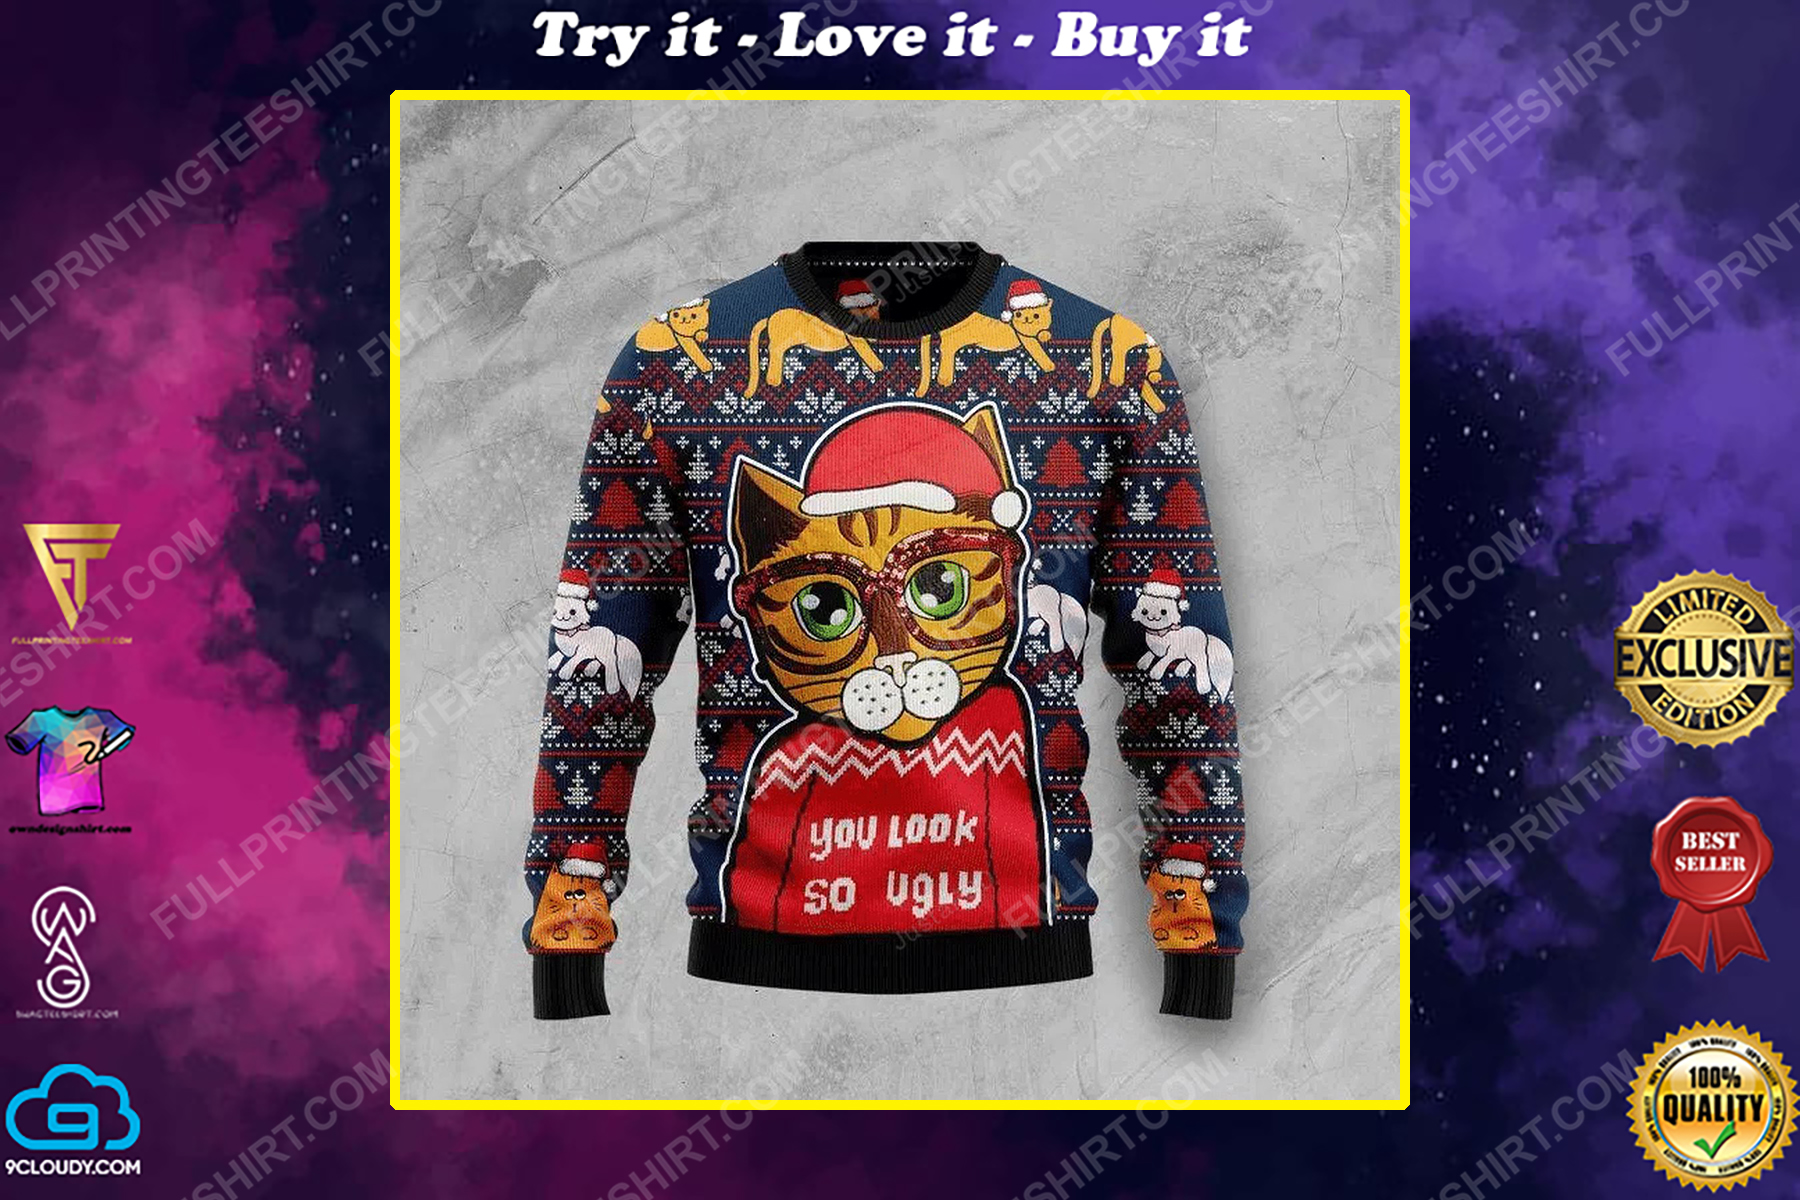 Cat you look so ugly ugly christmas sweater